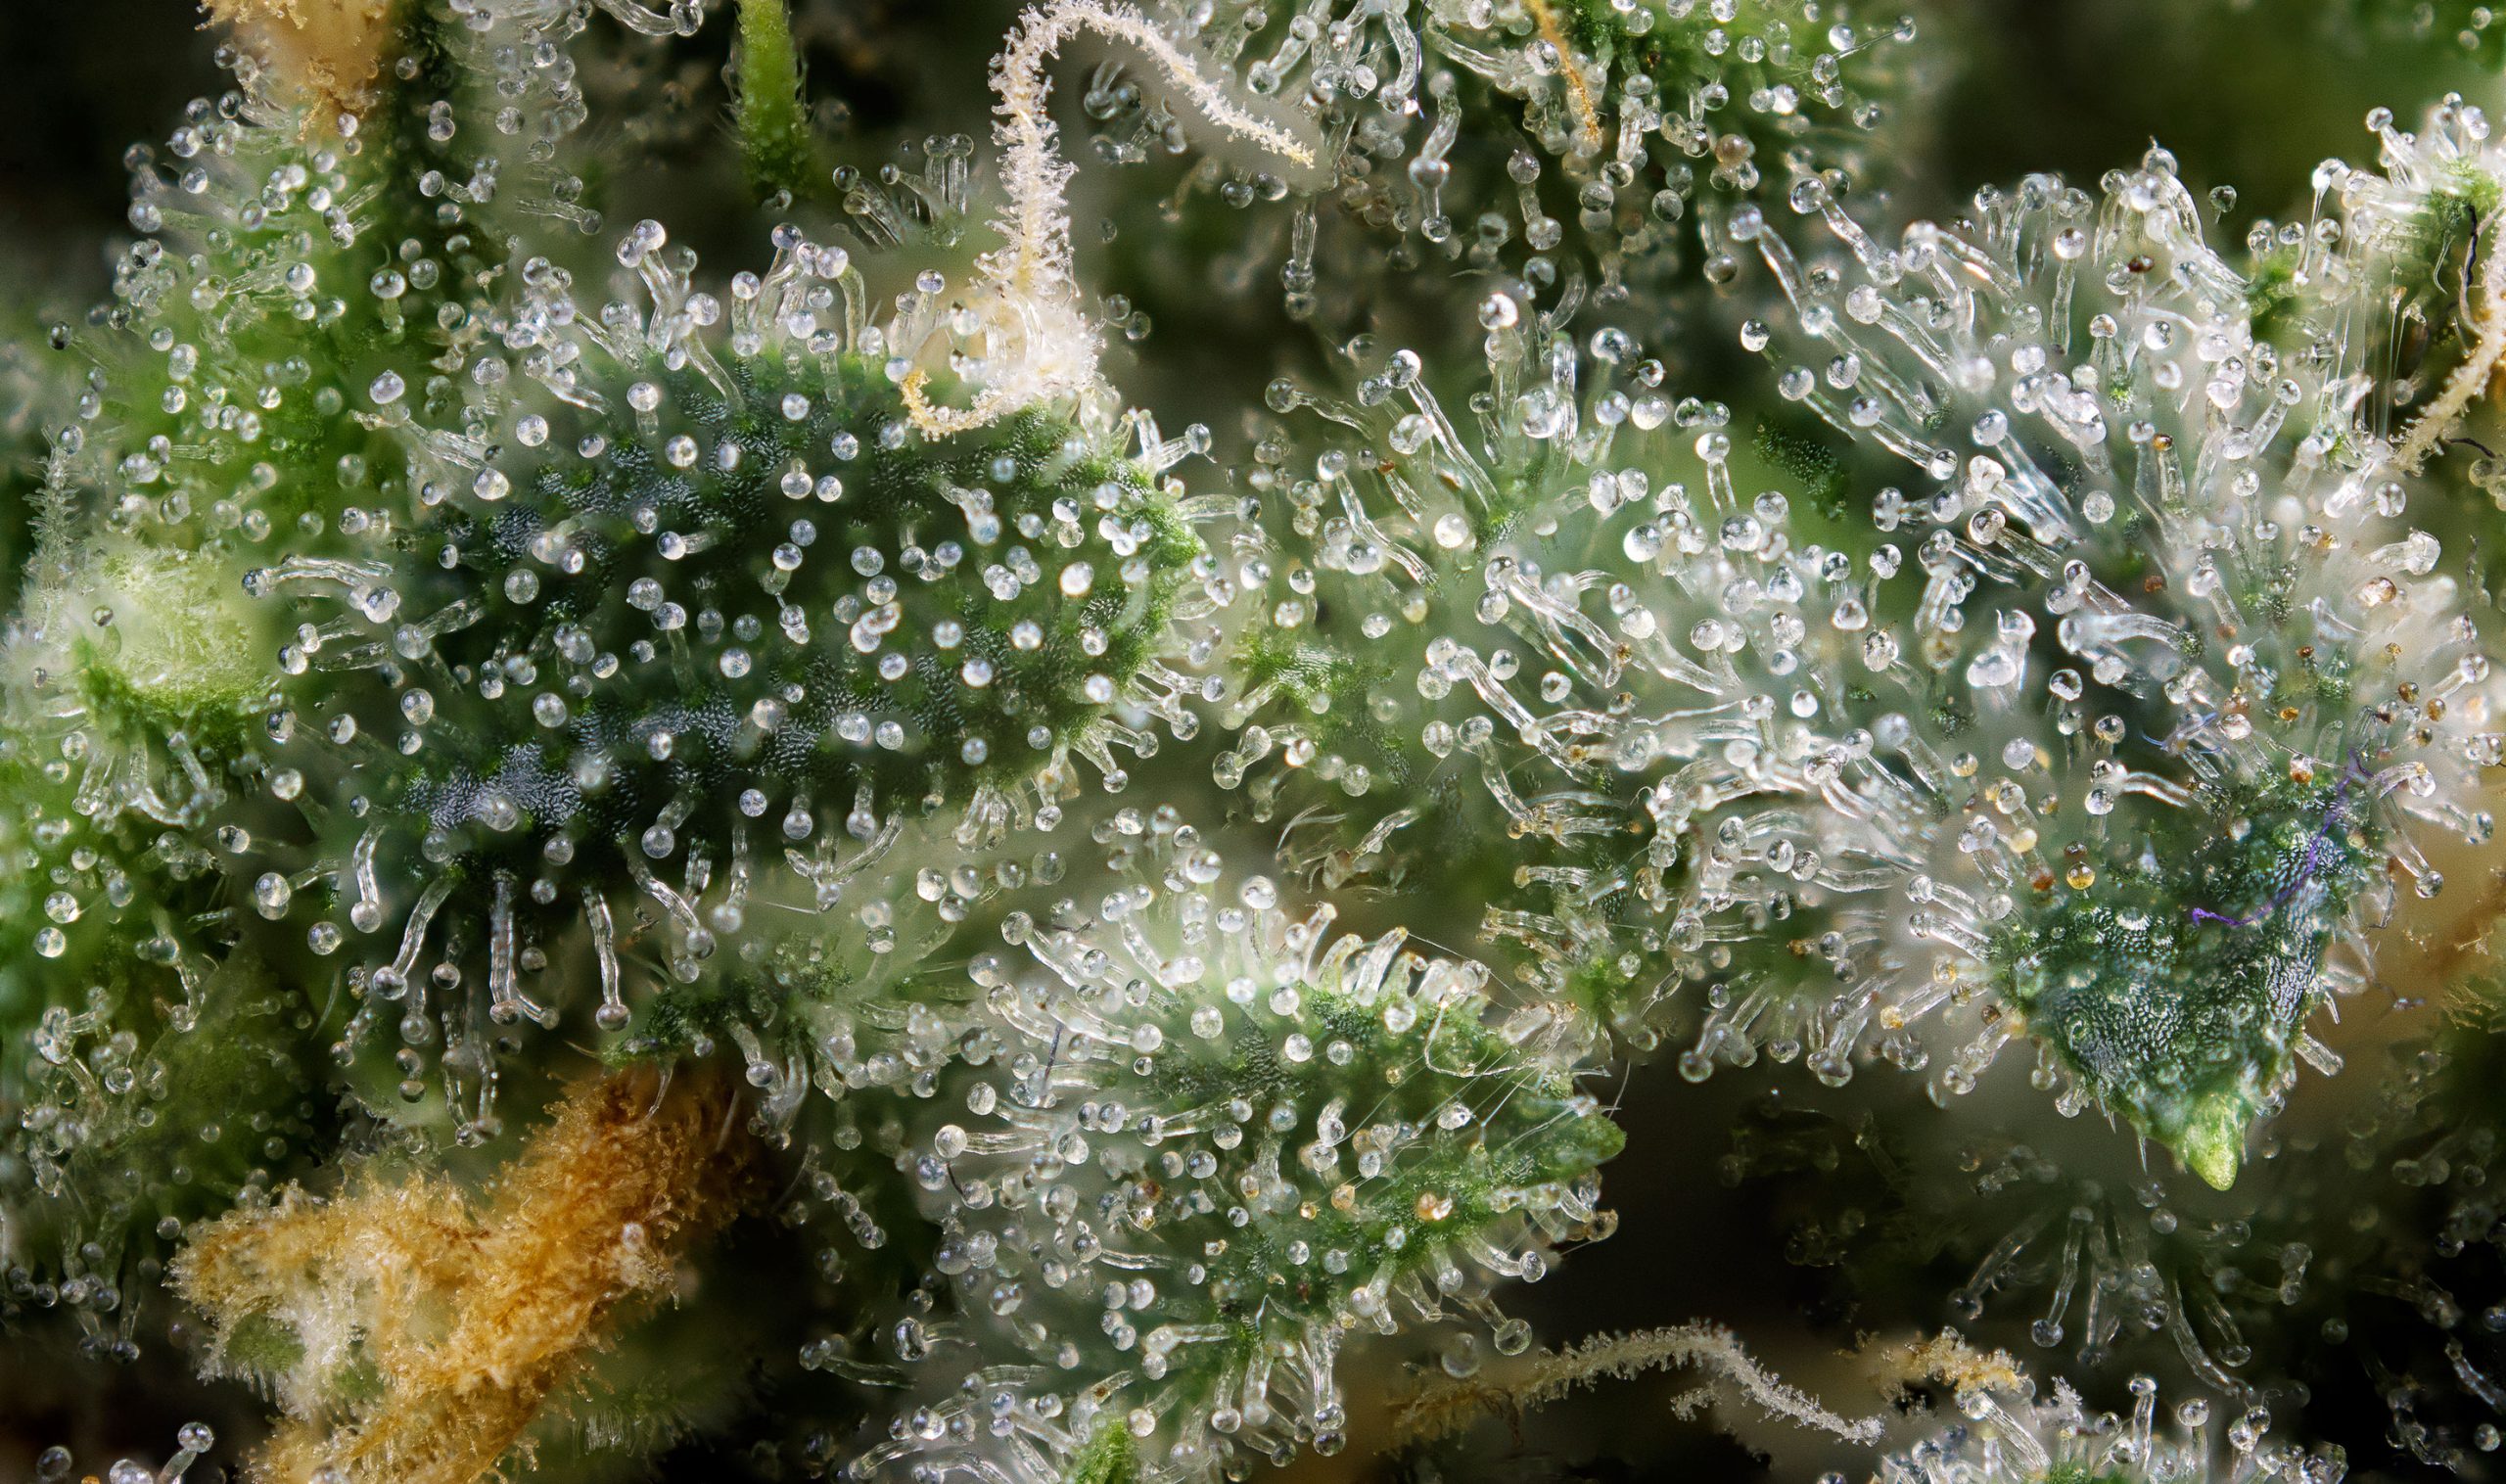 A WeedHub Guide: Everything You Need To Know About Cannabinoids